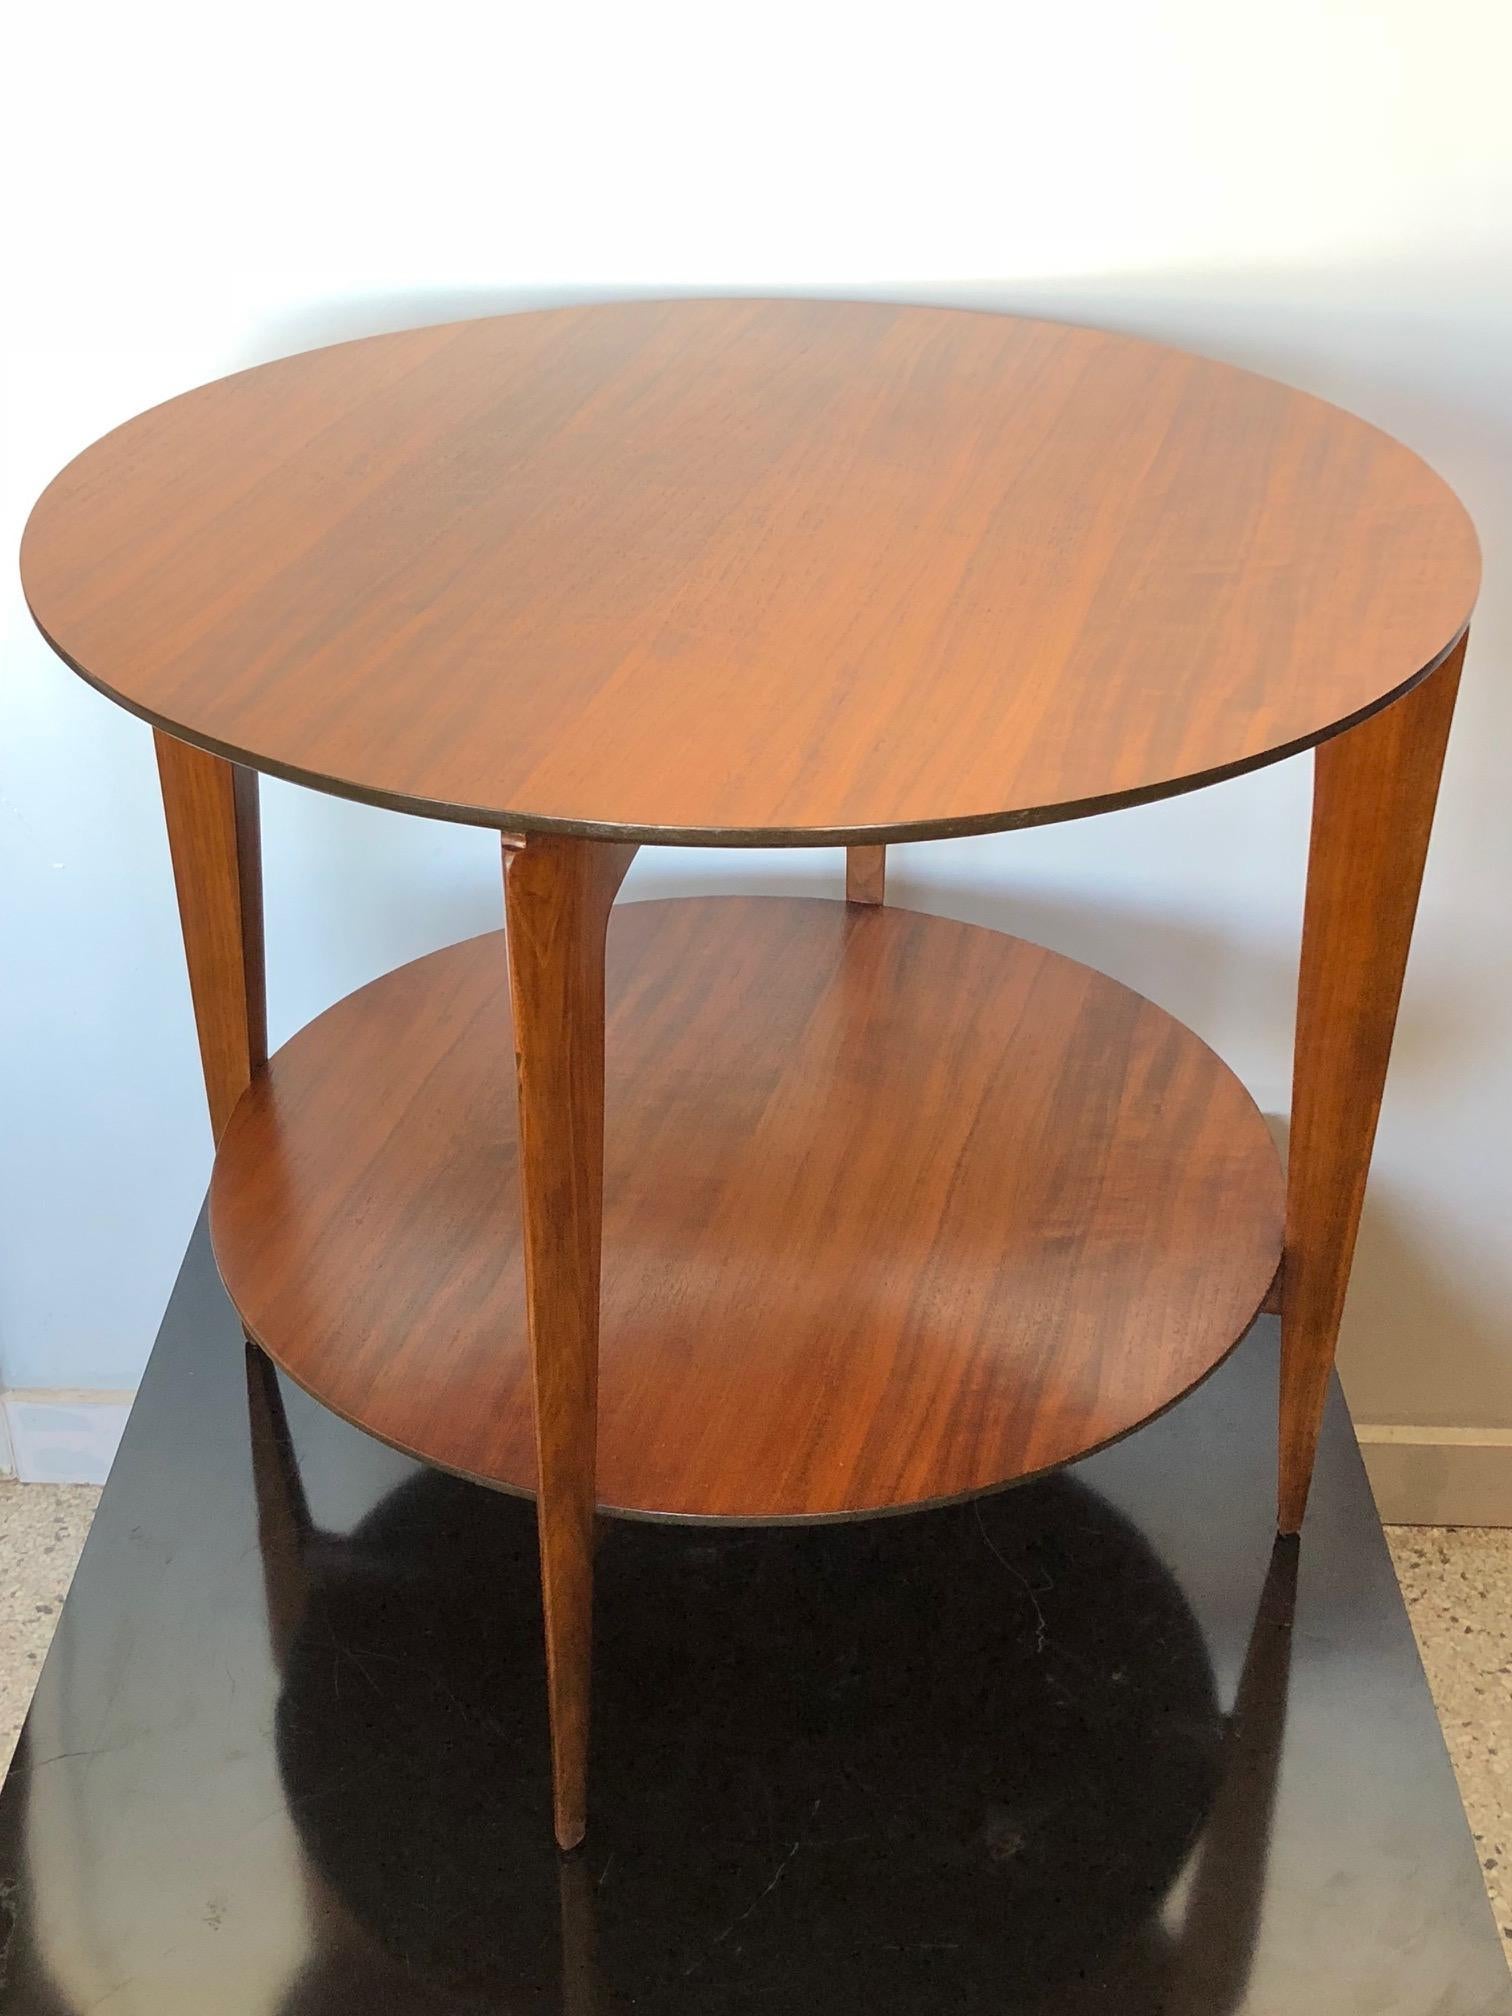 Mid-20th Century Gio Ponti Occasional Table